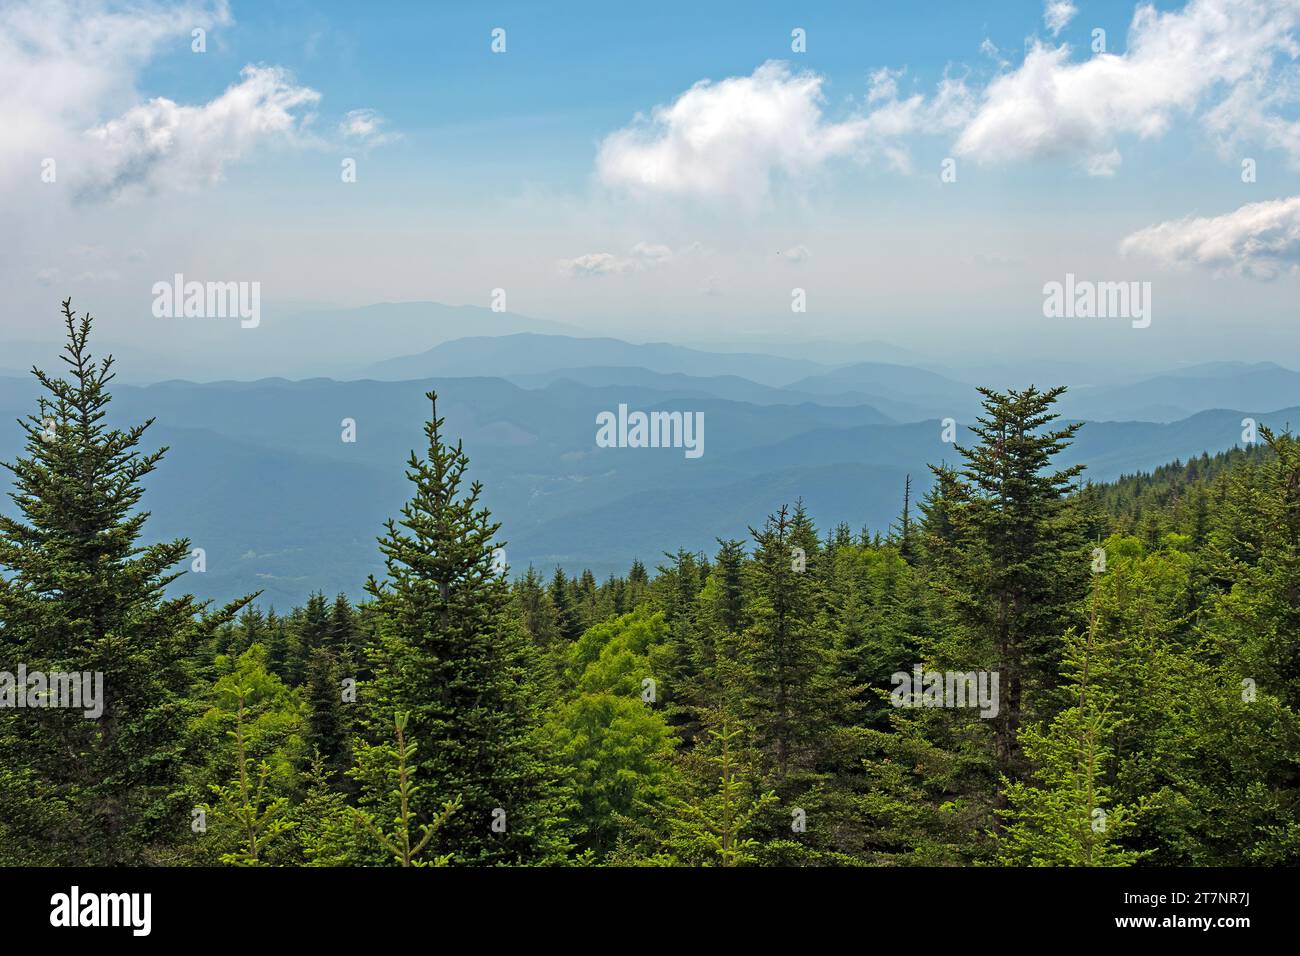 Hazy Mountains in the Distance Over a Verdant Forest From Mt Mitchell in North Carolina Stock Photo